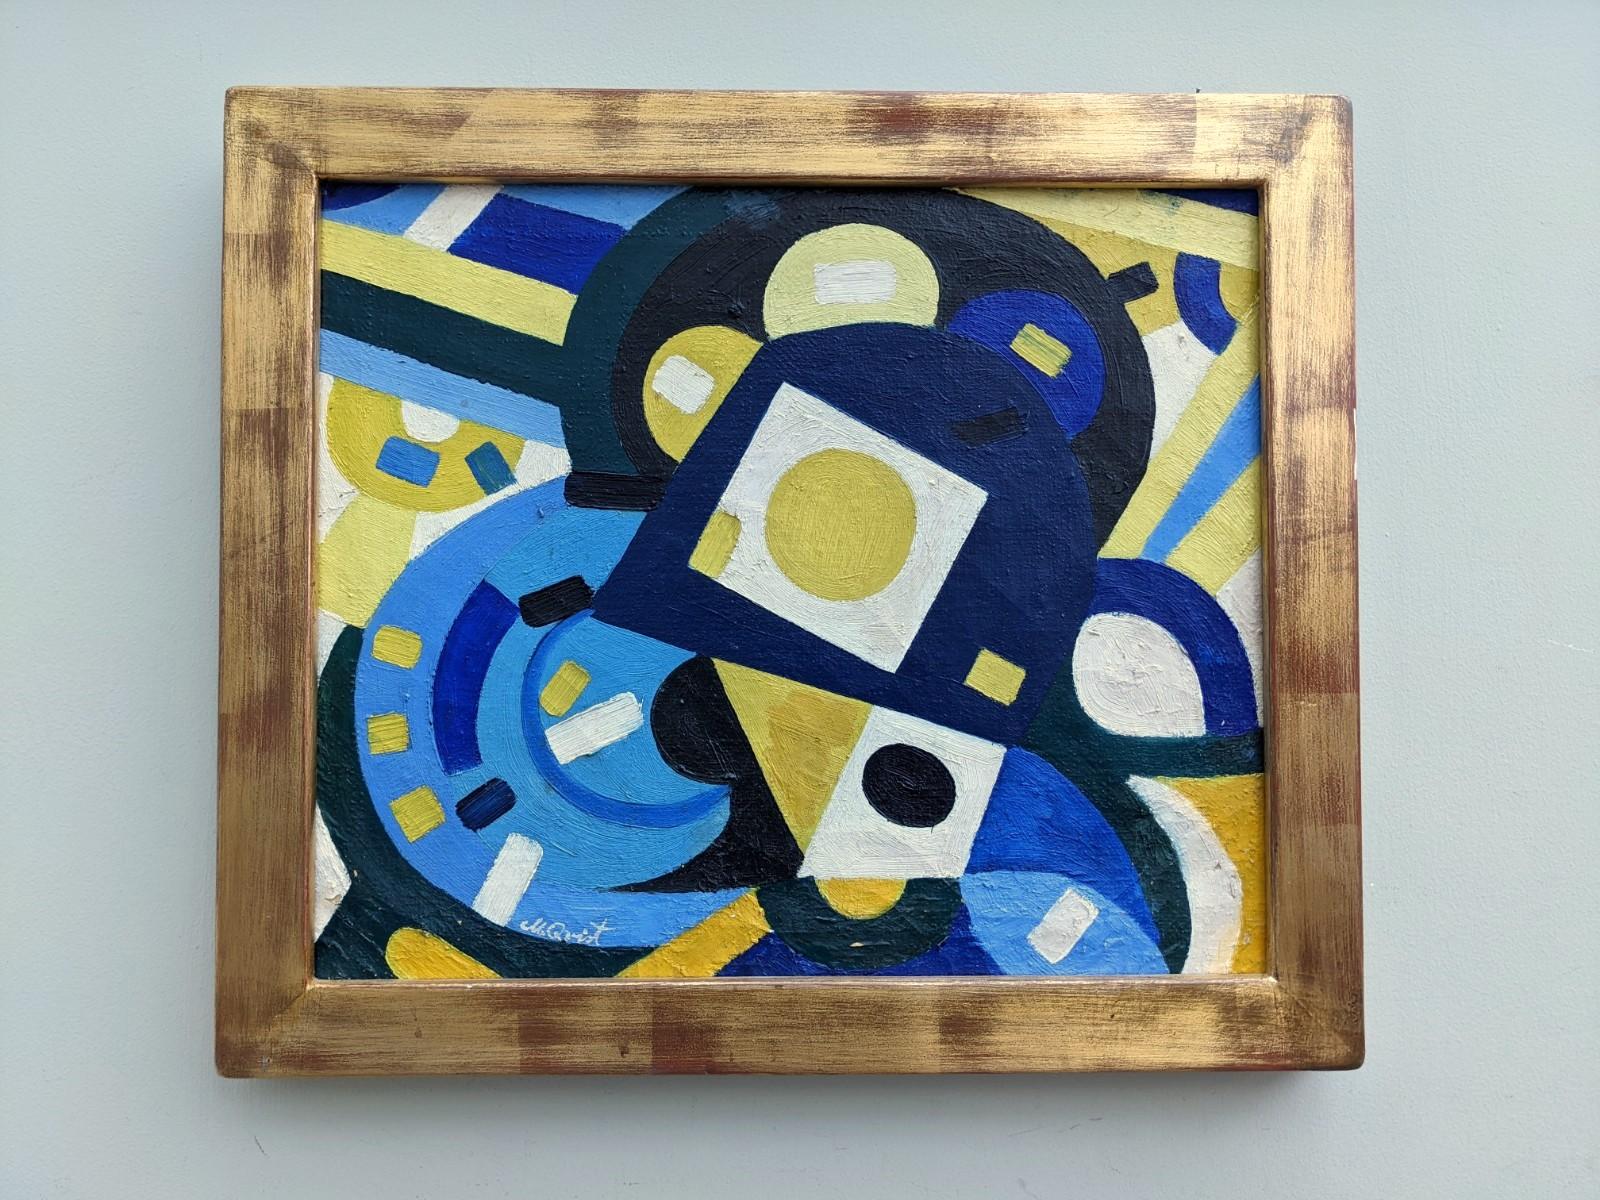 PUZZLE
Size: 46.5 x 53.5 cm (including frame)
Oil on canvas


A fun and playful mid-century geometric abstract composition, executed in oil onto canvas.

This painting focuses our attention on non-objective artistic elements such as colour, line,